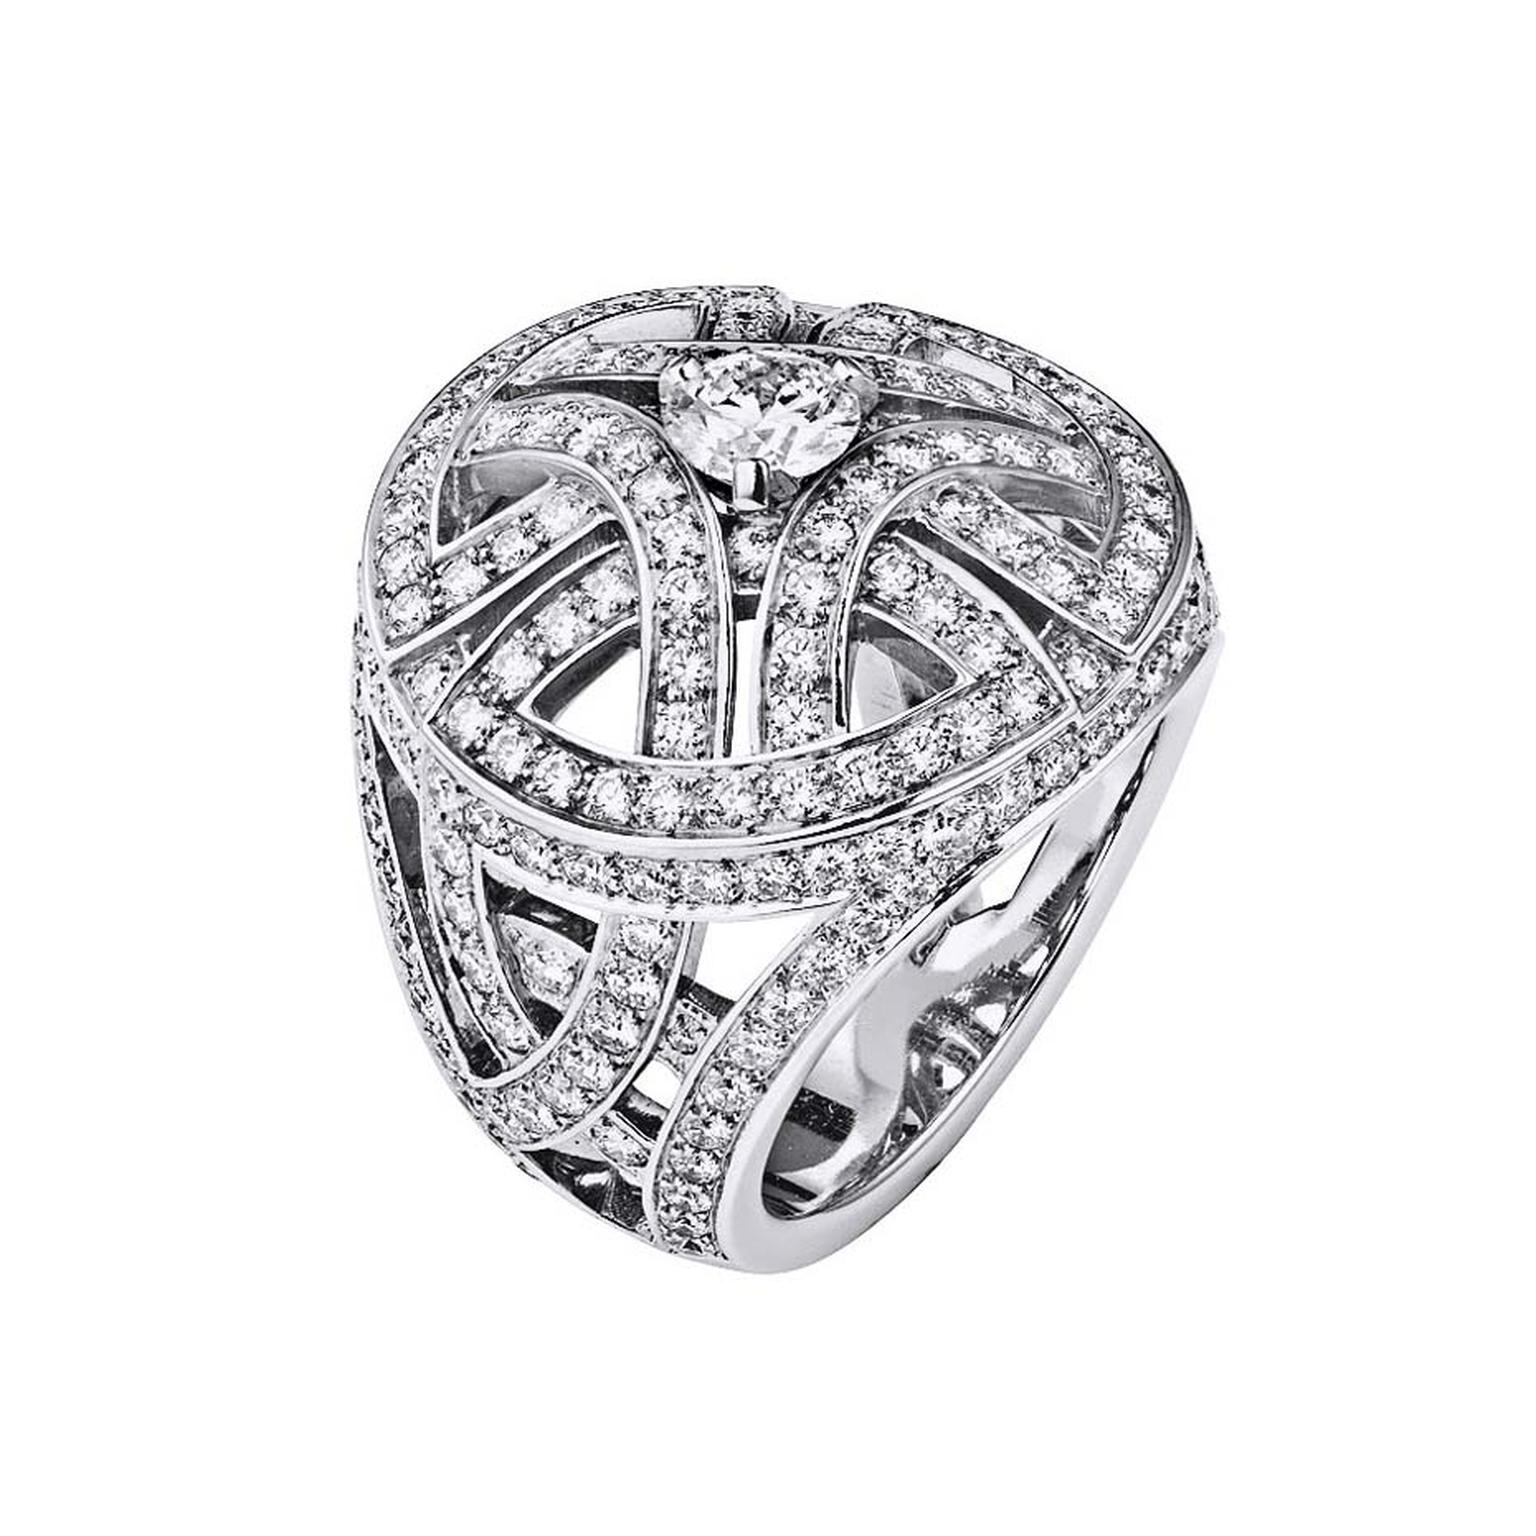 Cartier Paris Nouvelle Vague ring with arabesque motifs pavéd entirely with diamonds and set with a dazzling brilliant-cut diamond in the centre.